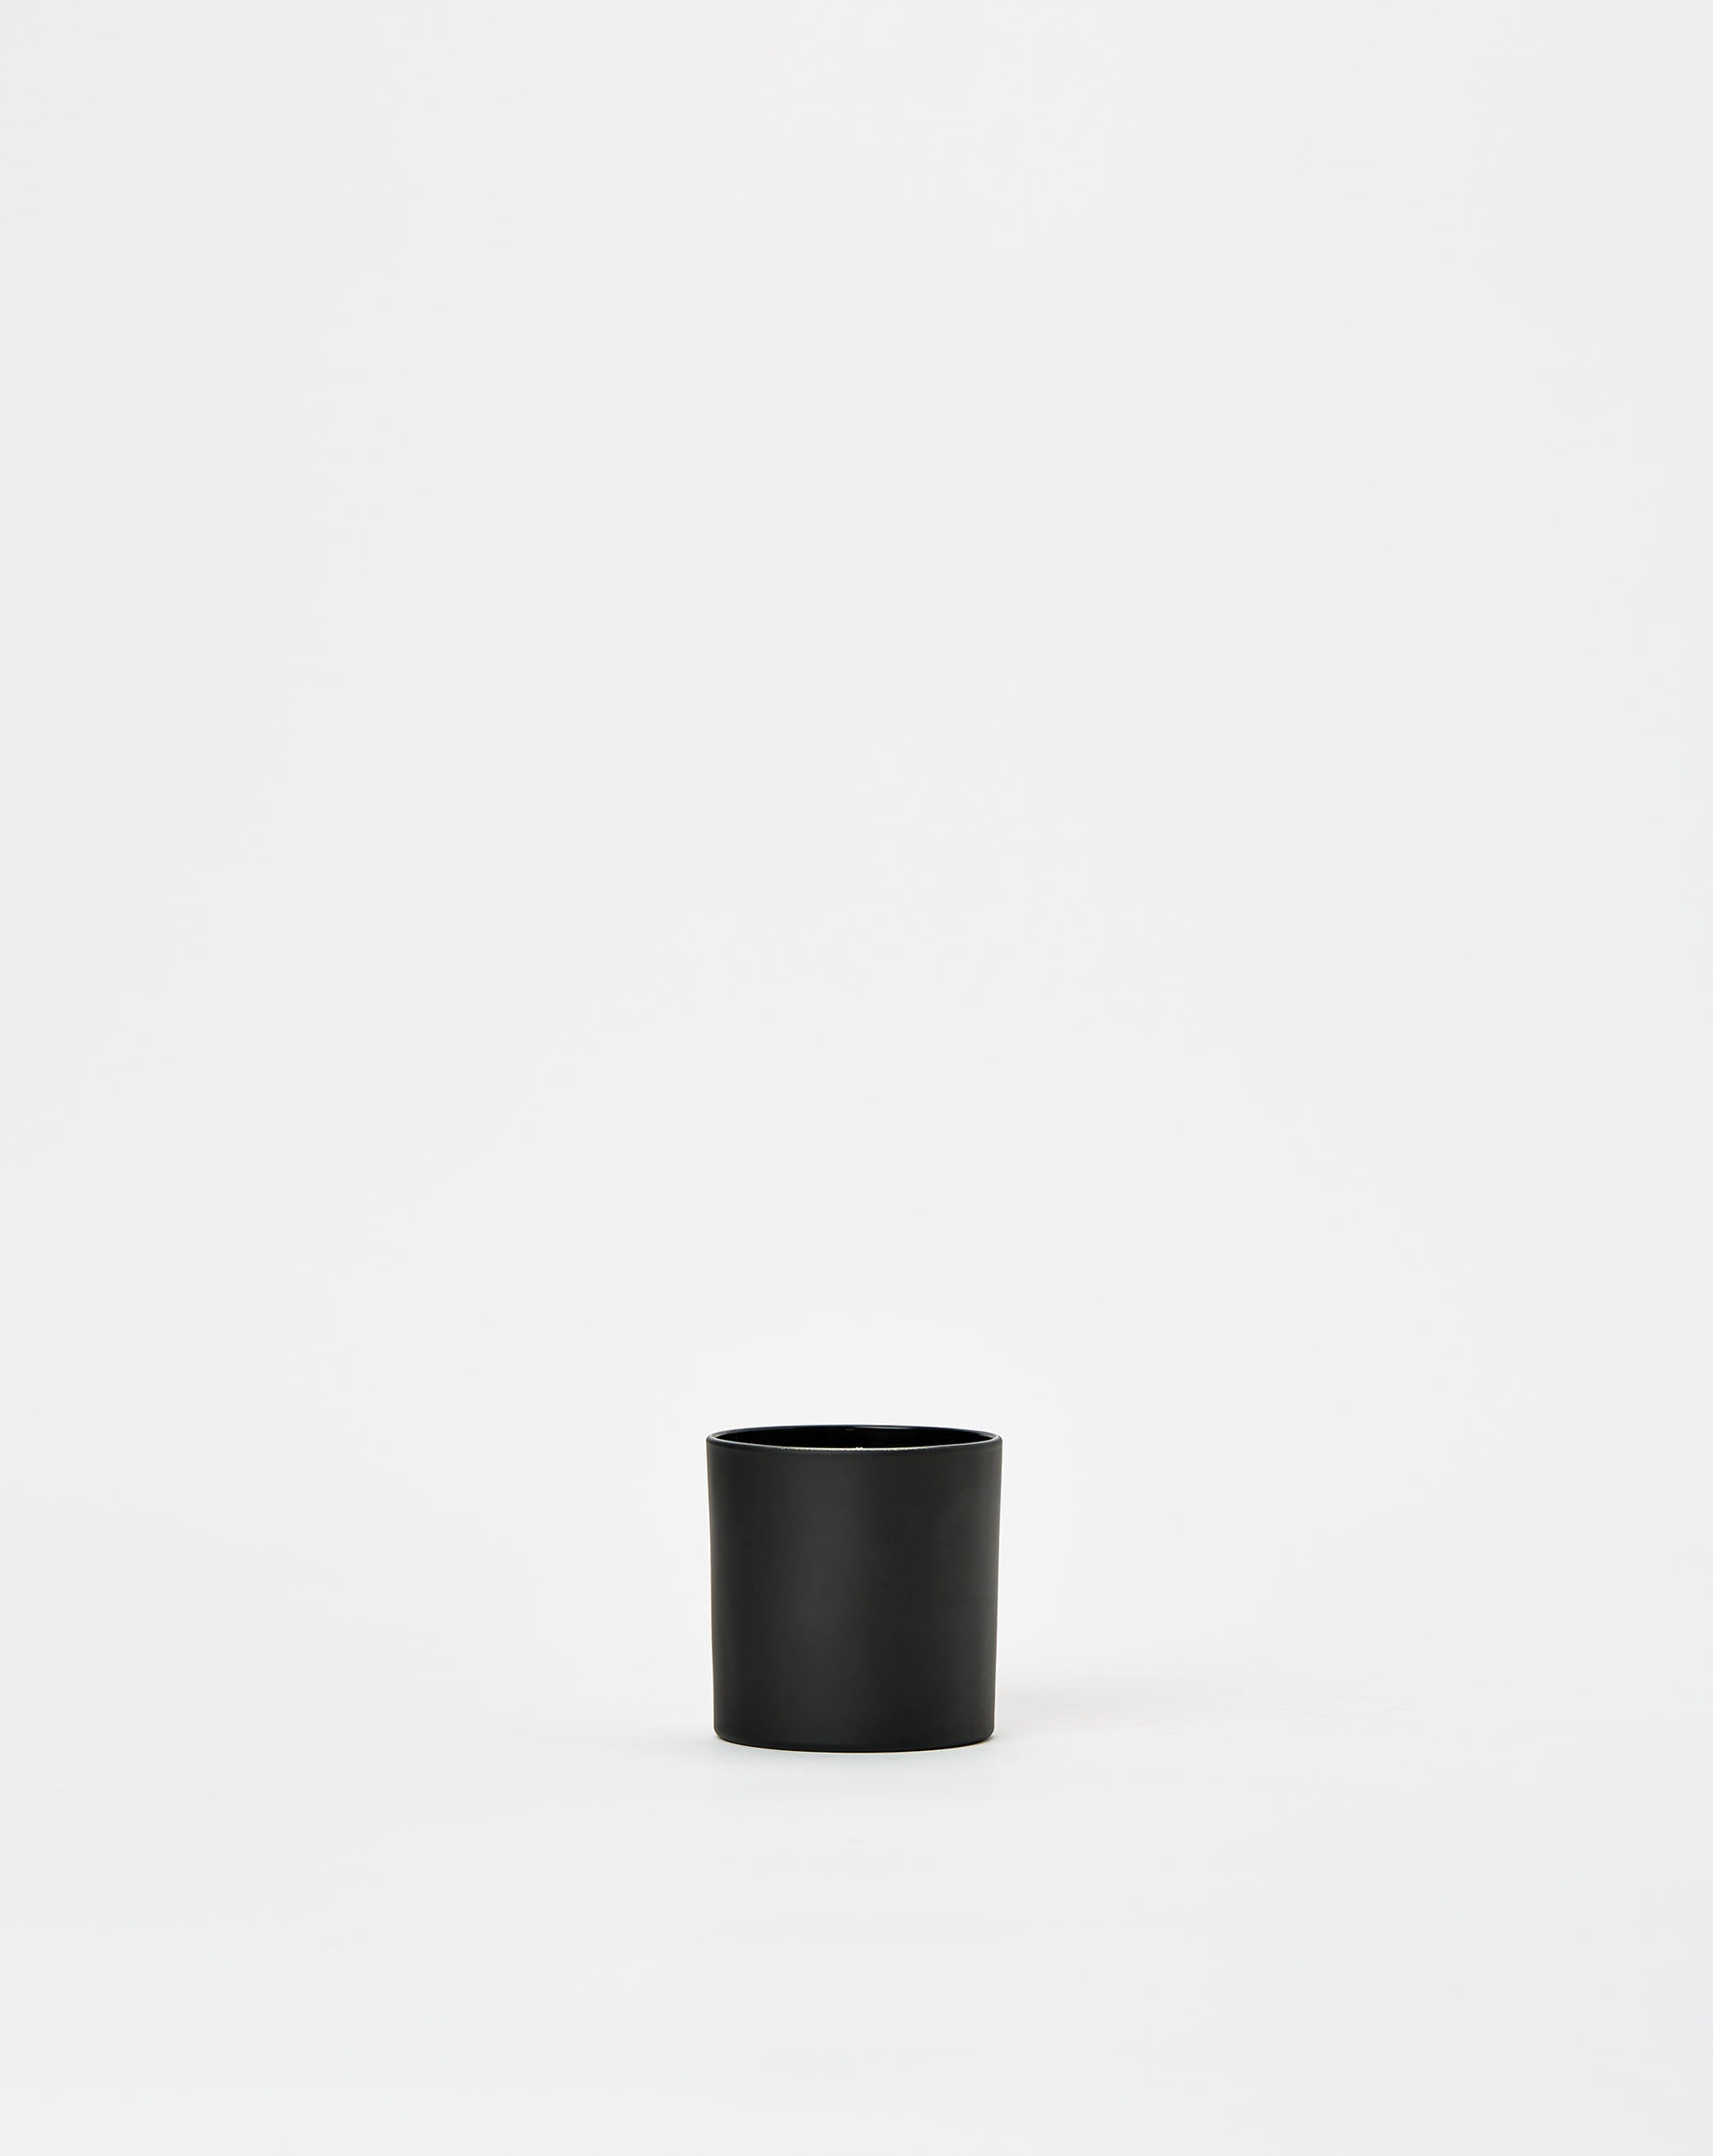 /IN'SCEN(T)IVE/ Rooted Candle  - Cheap Cerbe Jordan outlet